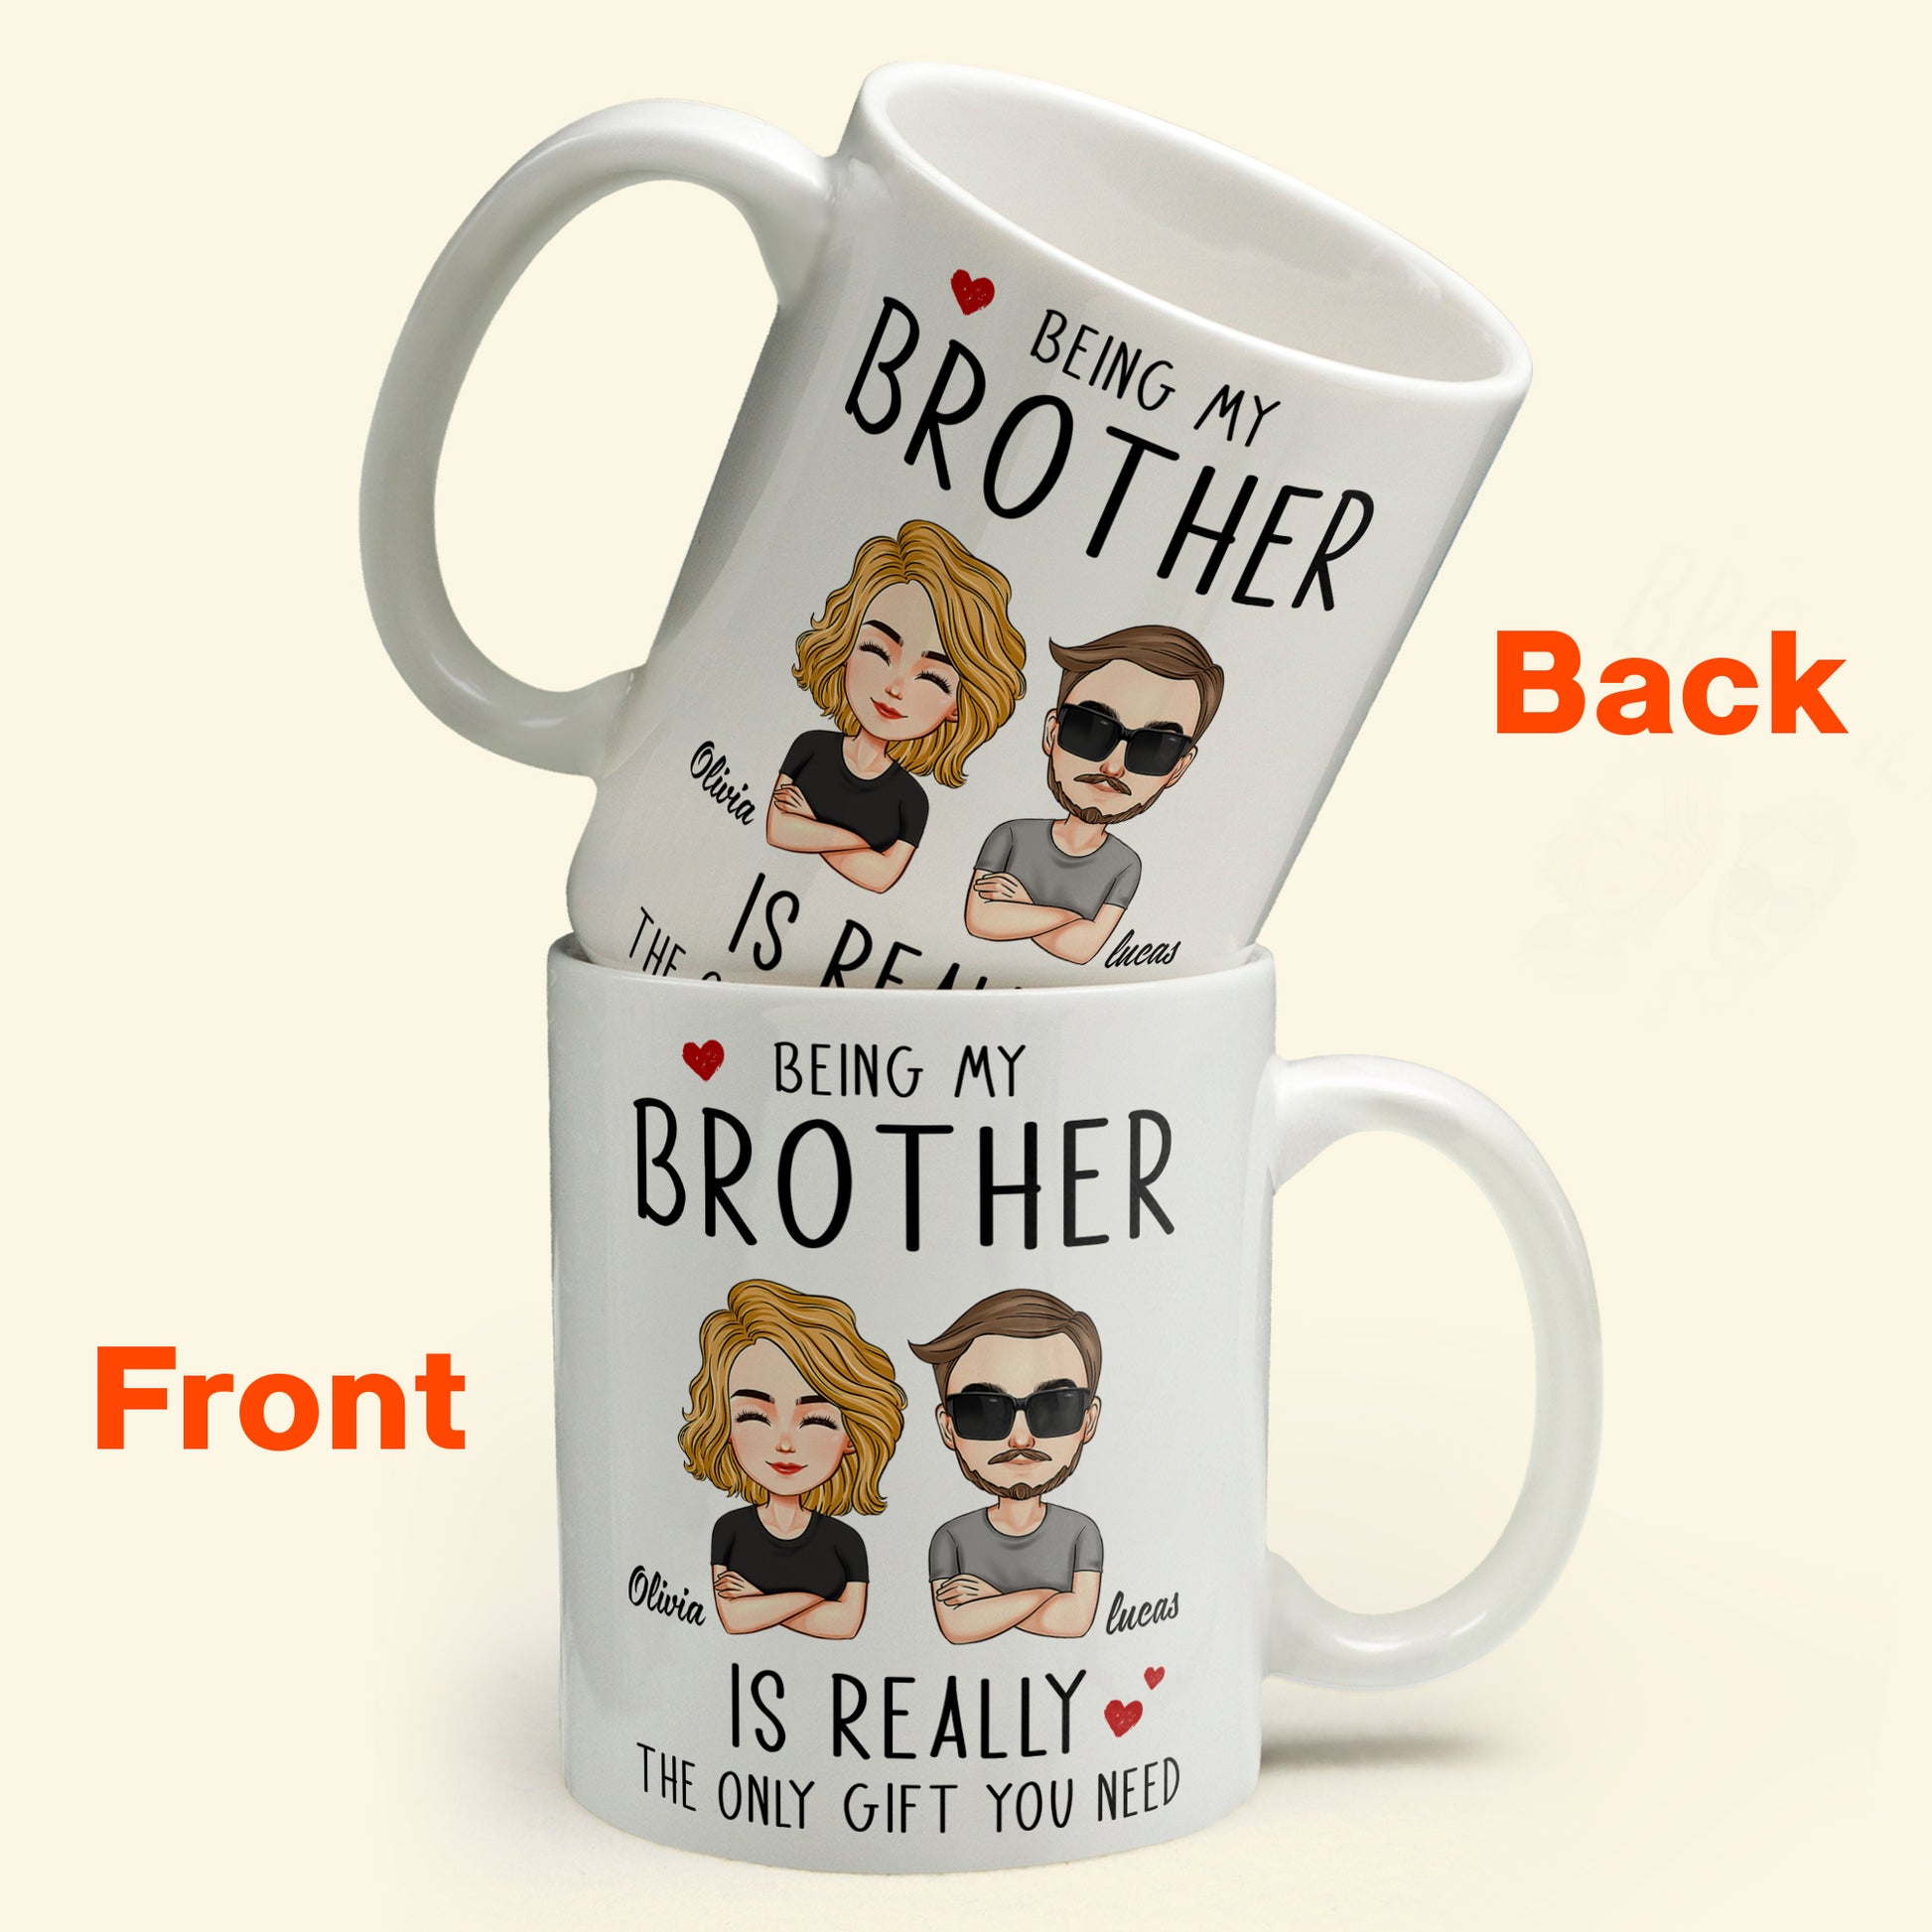 https://macorner.co/cdn/shop/files/Really-The-Only-Gift-You-Need-Personalized-Mug-2.jpg?v=1684929548&width=1946